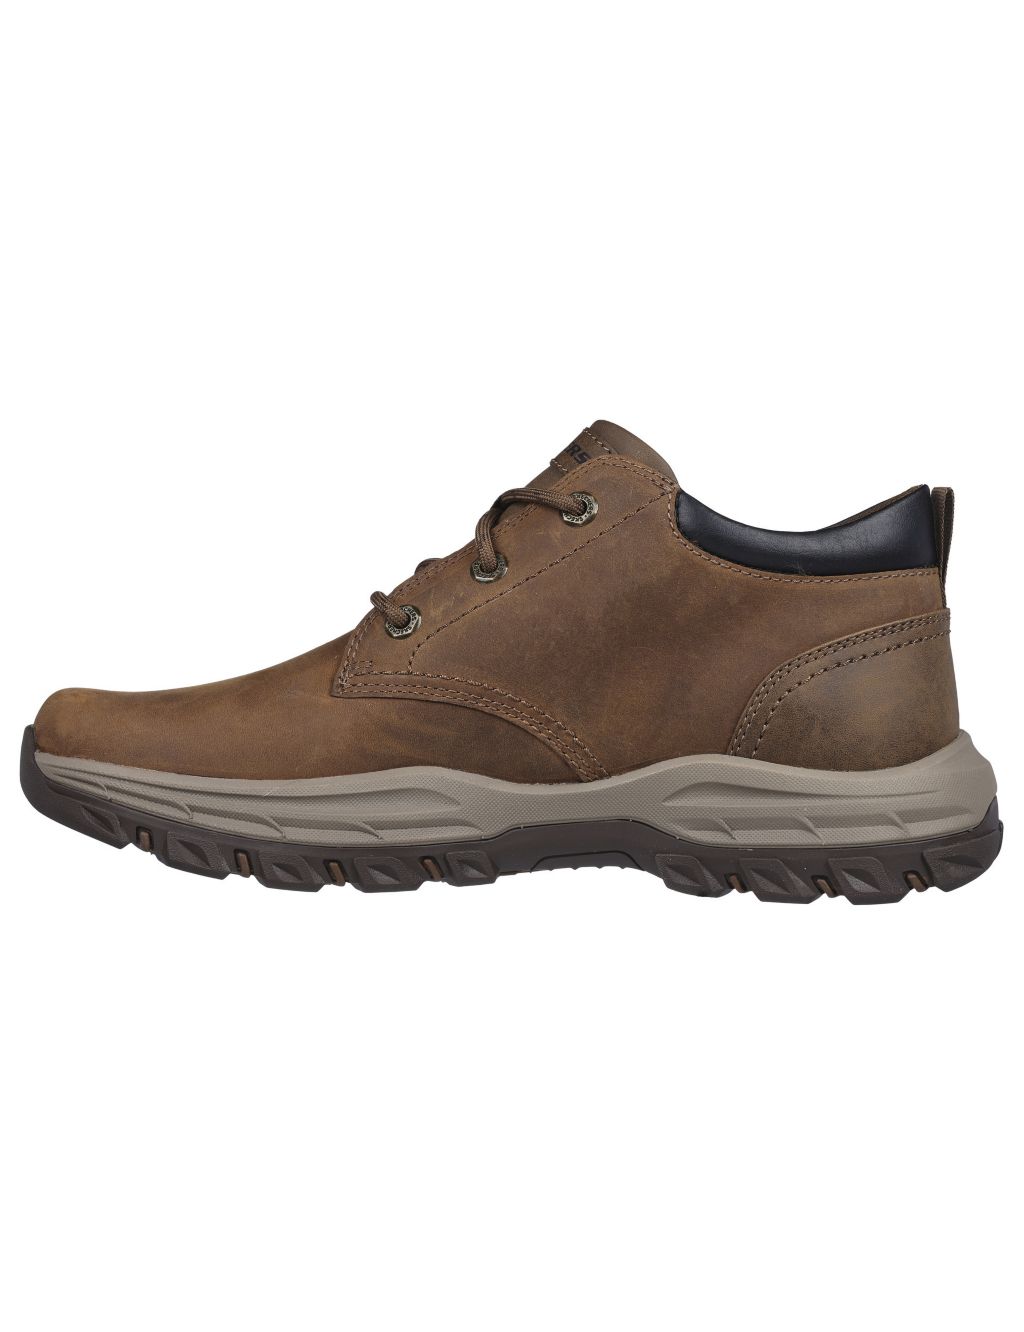 Relaxed Fit™ Knowlson Ramhurst Boots image 4